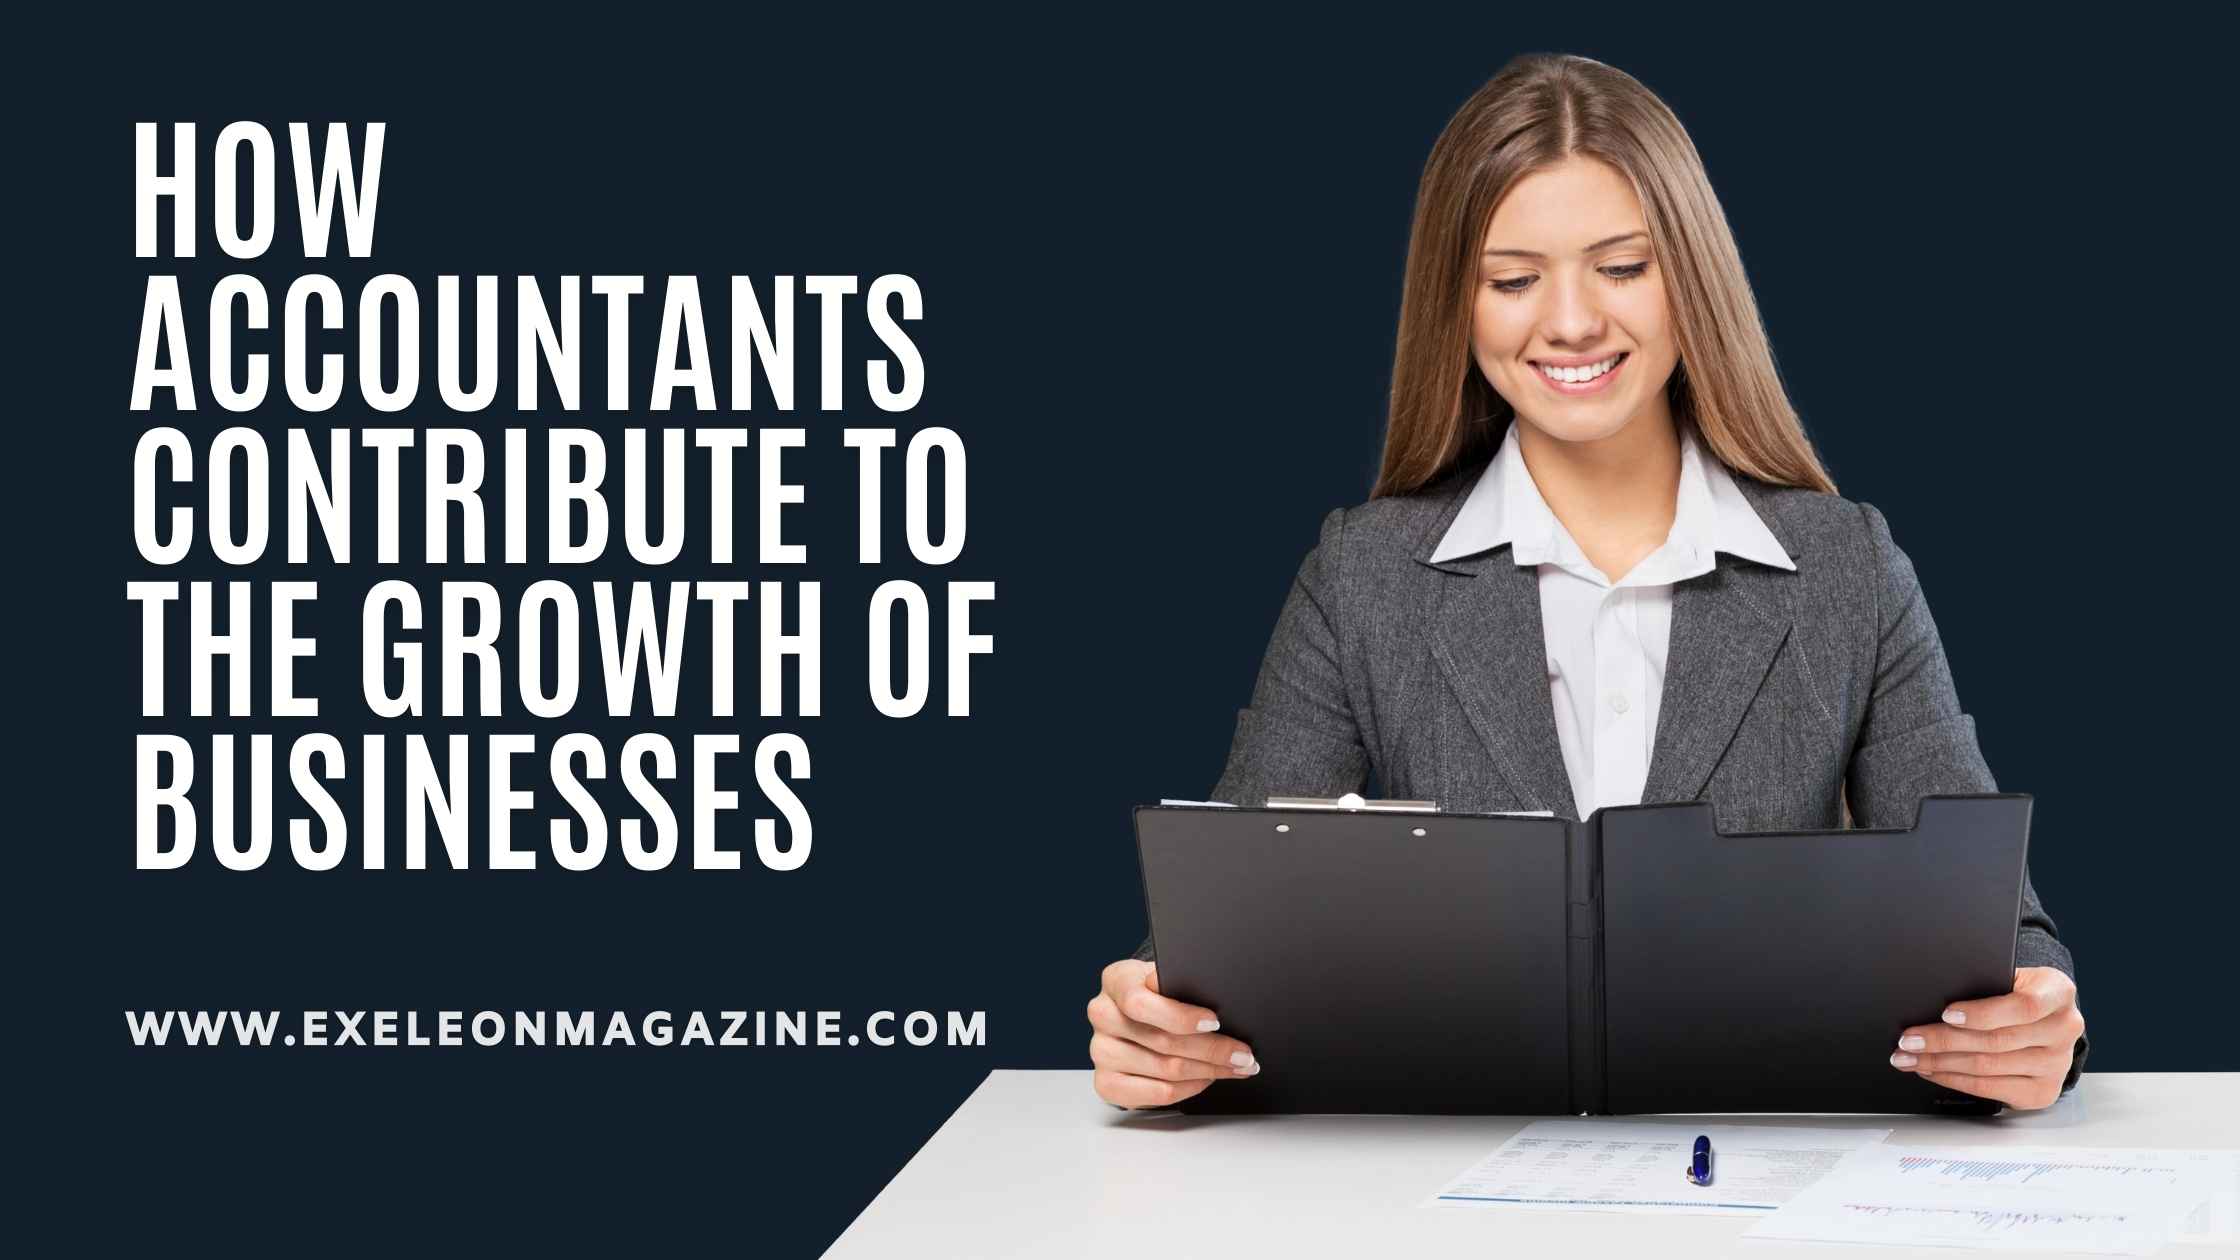 Accountants Contribute to the Growth of Businesses